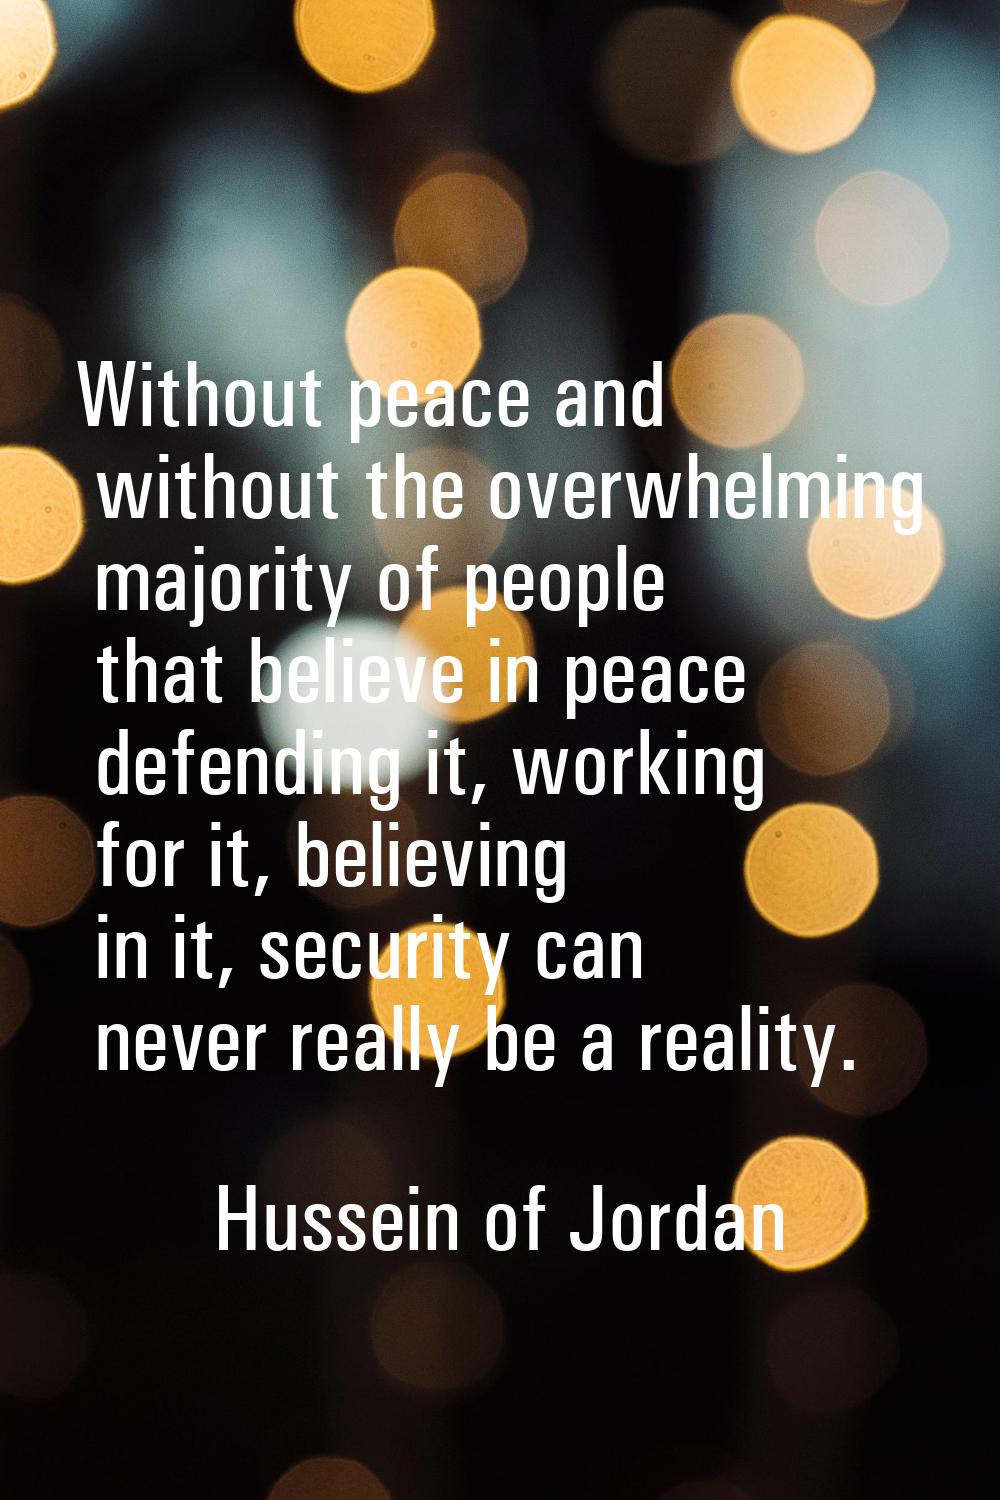 Without peace and without the overwhelming majority of people that believe in peace defending it, w